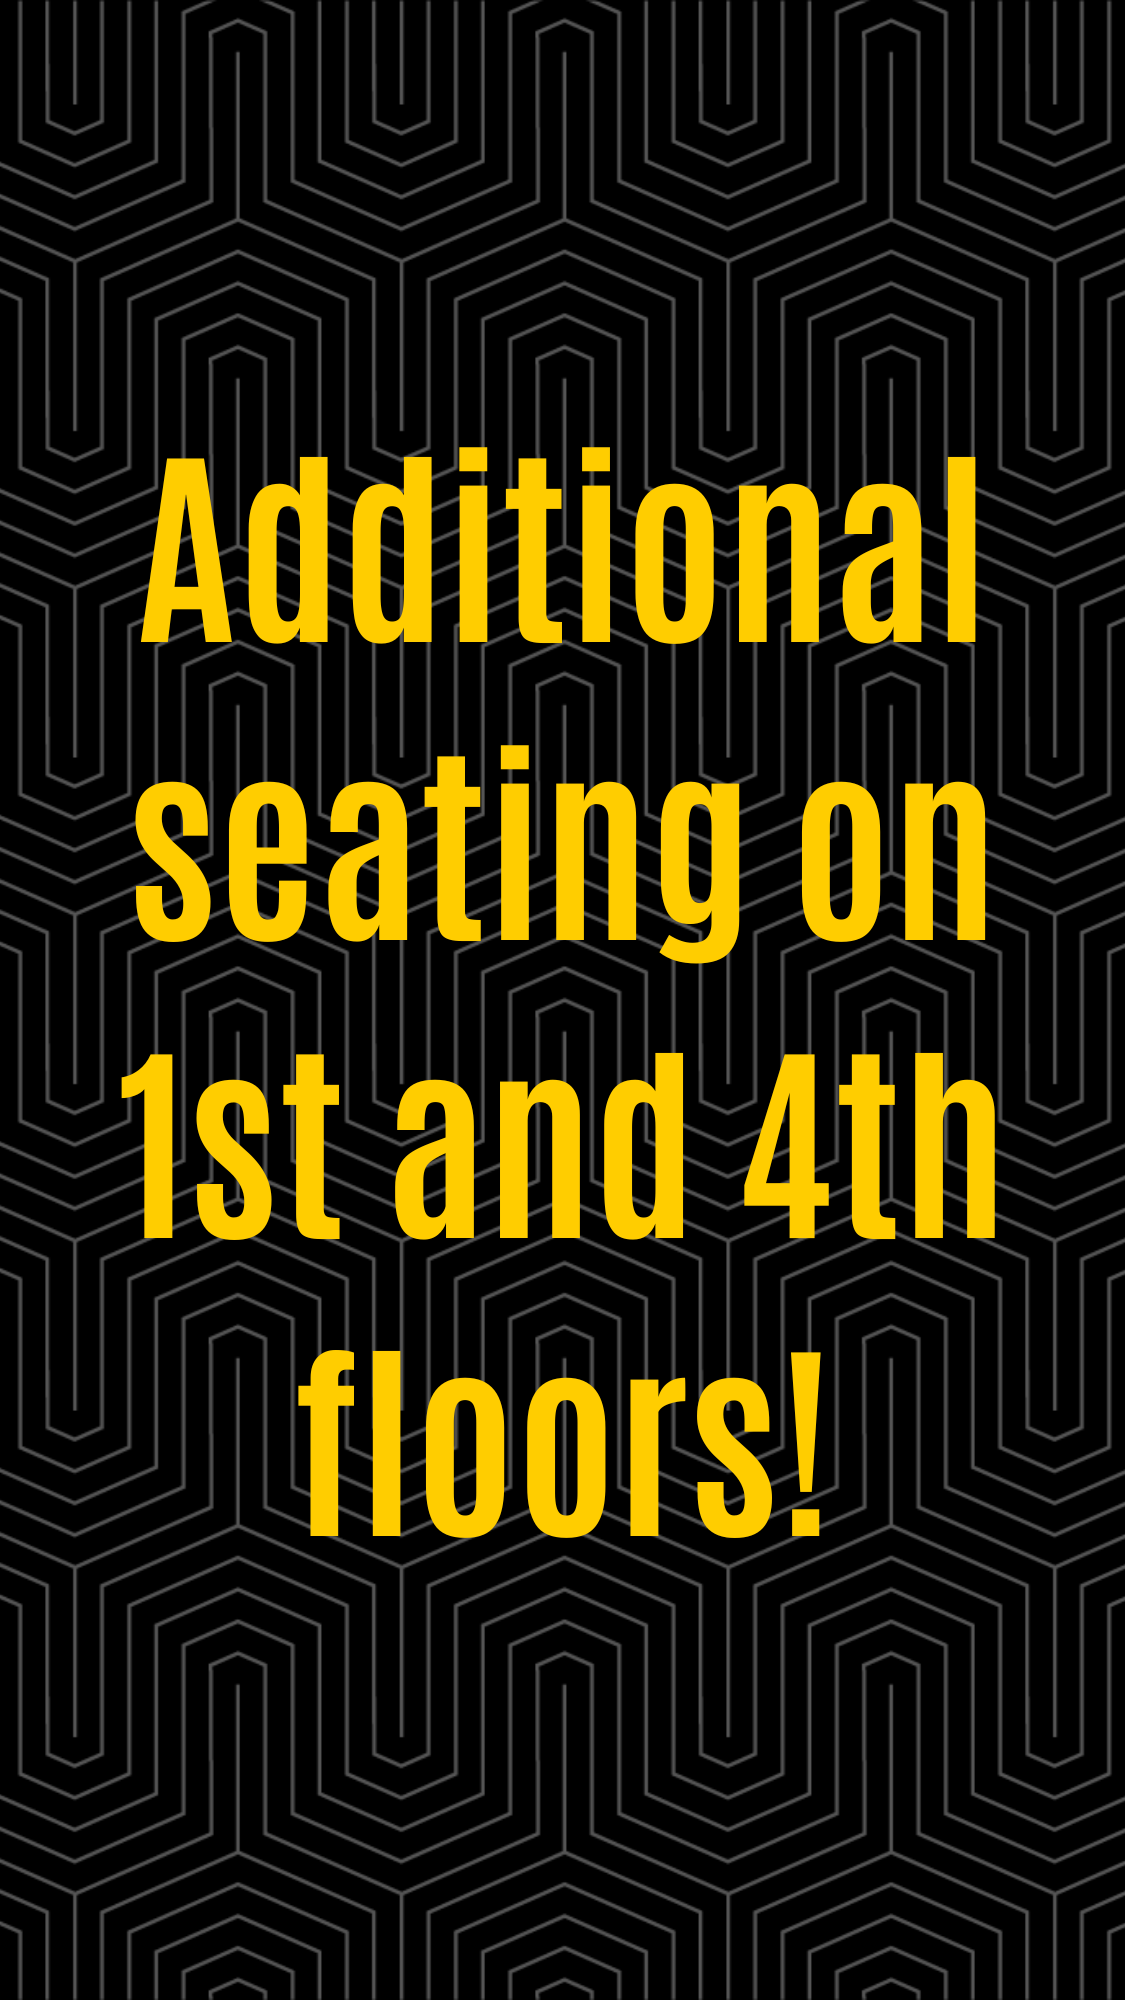 Additional seating on 1st and 4th floors!